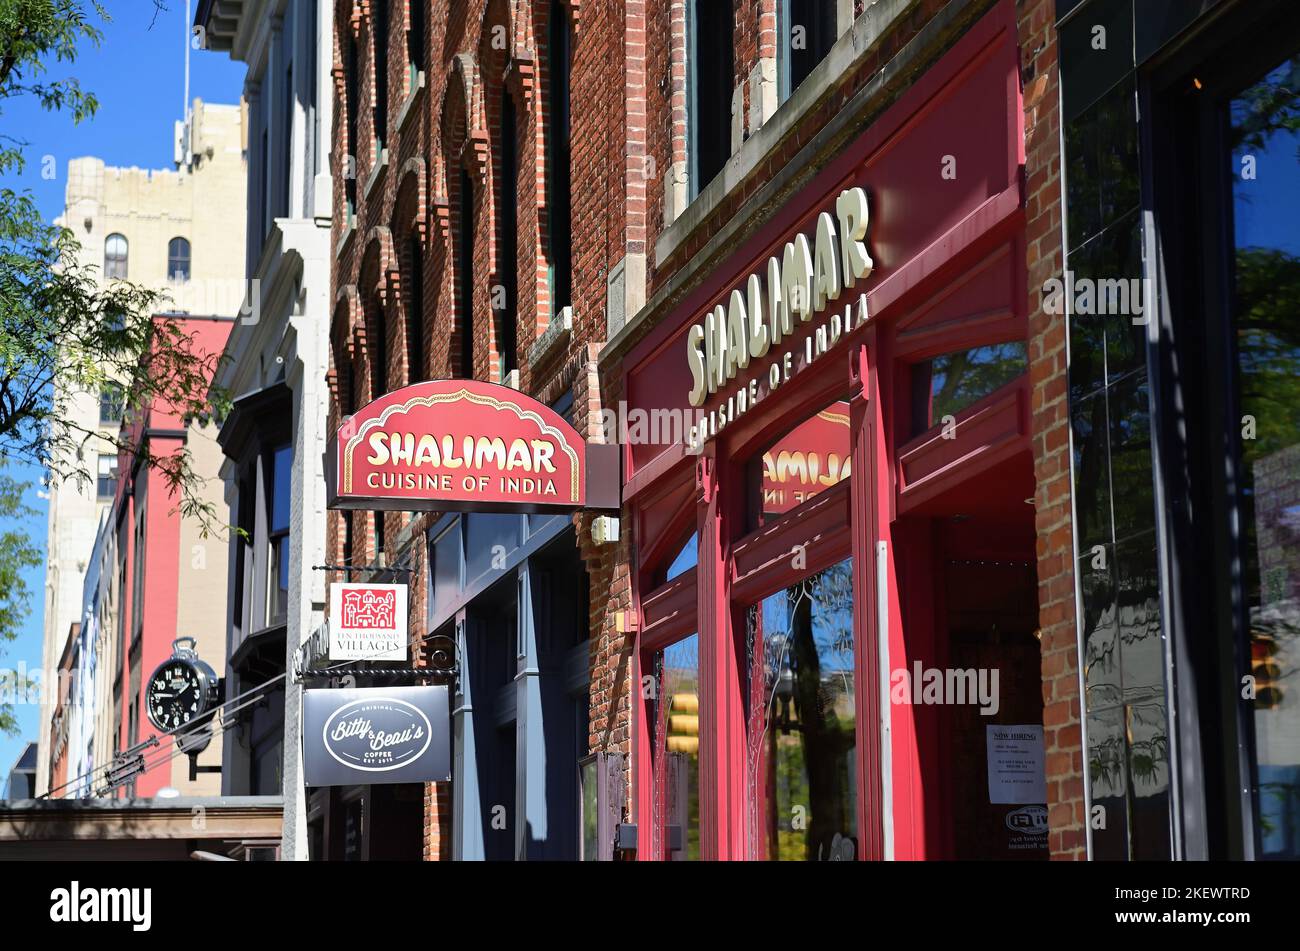 Ann Arbor, Michigan, USA. Shops, restaurants and businesses along a street near the University of Michigan campus. Stock Photo